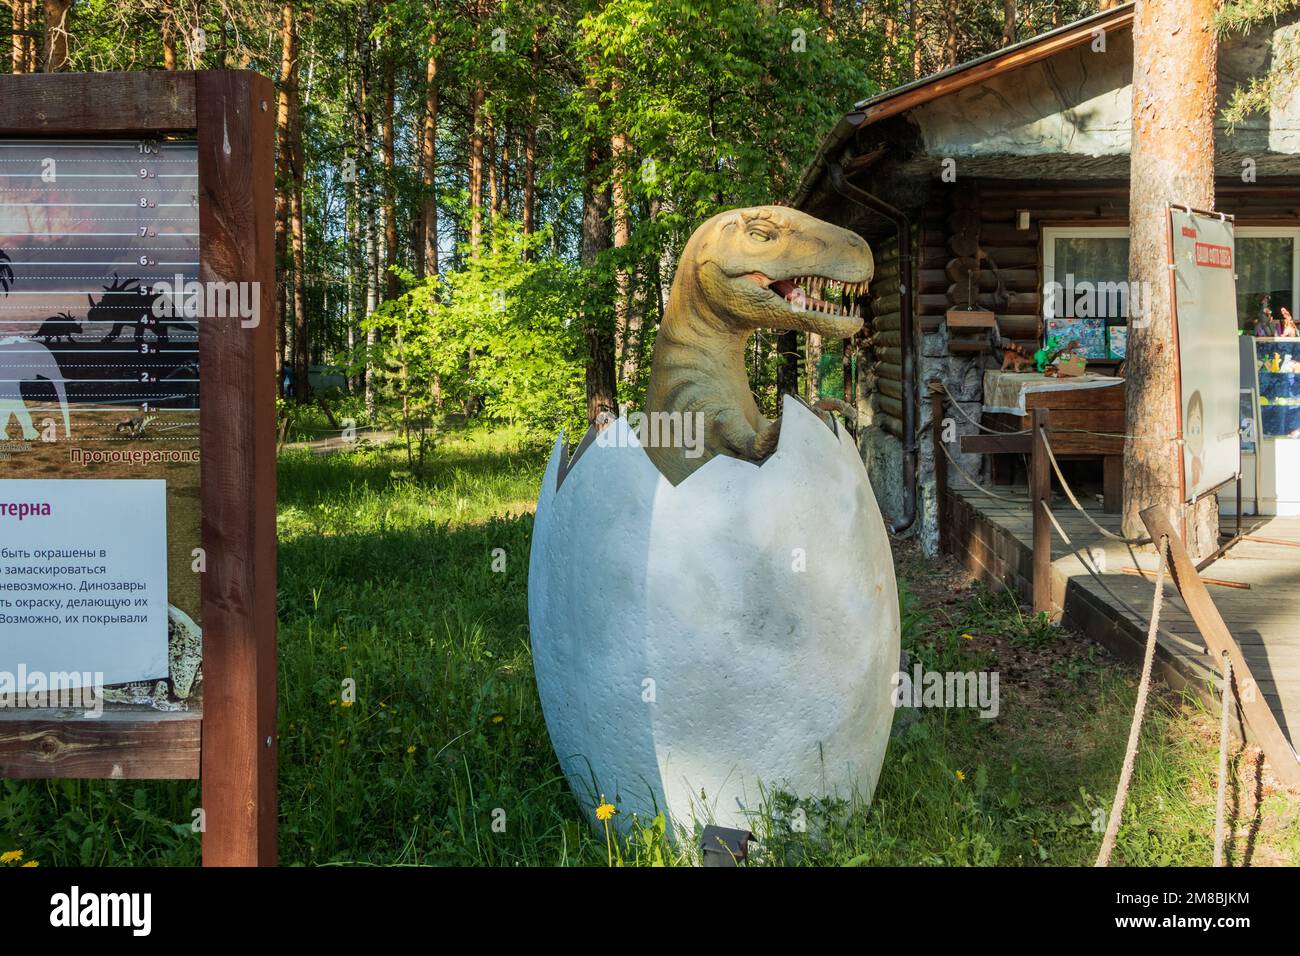 Chelyabinsk, Russia - June 01, 2022. The figure of a small dinosaur hatched from an egg stands in the park. Stock Photo